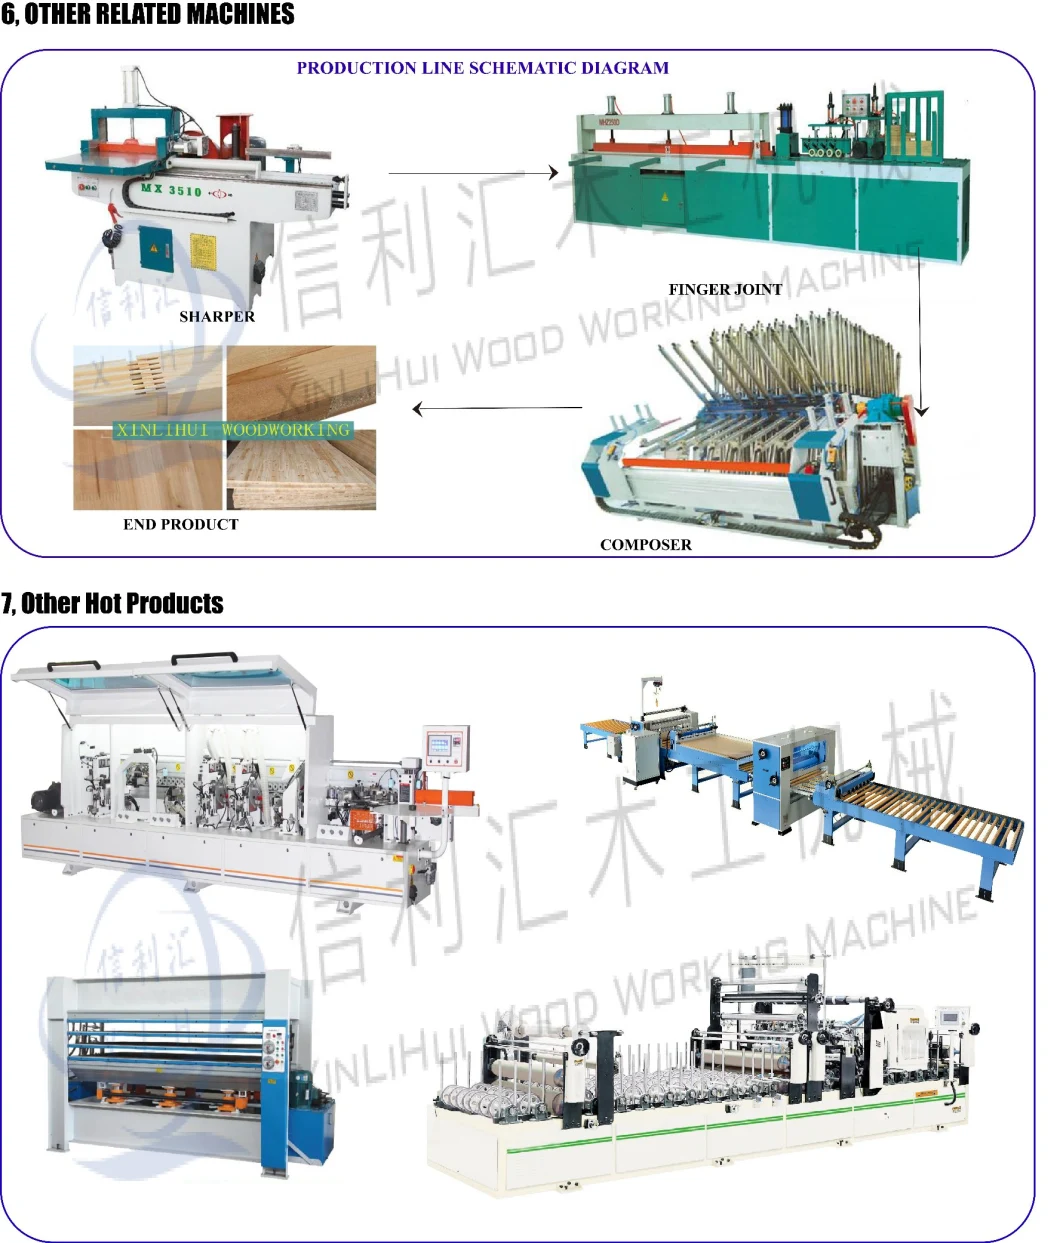 High Efficient Full Automatic Finger Joint Press with Glue Wood Finger Joint Shaper Machine Finger-Jointing Line Finger-Jointers for Solid Wood